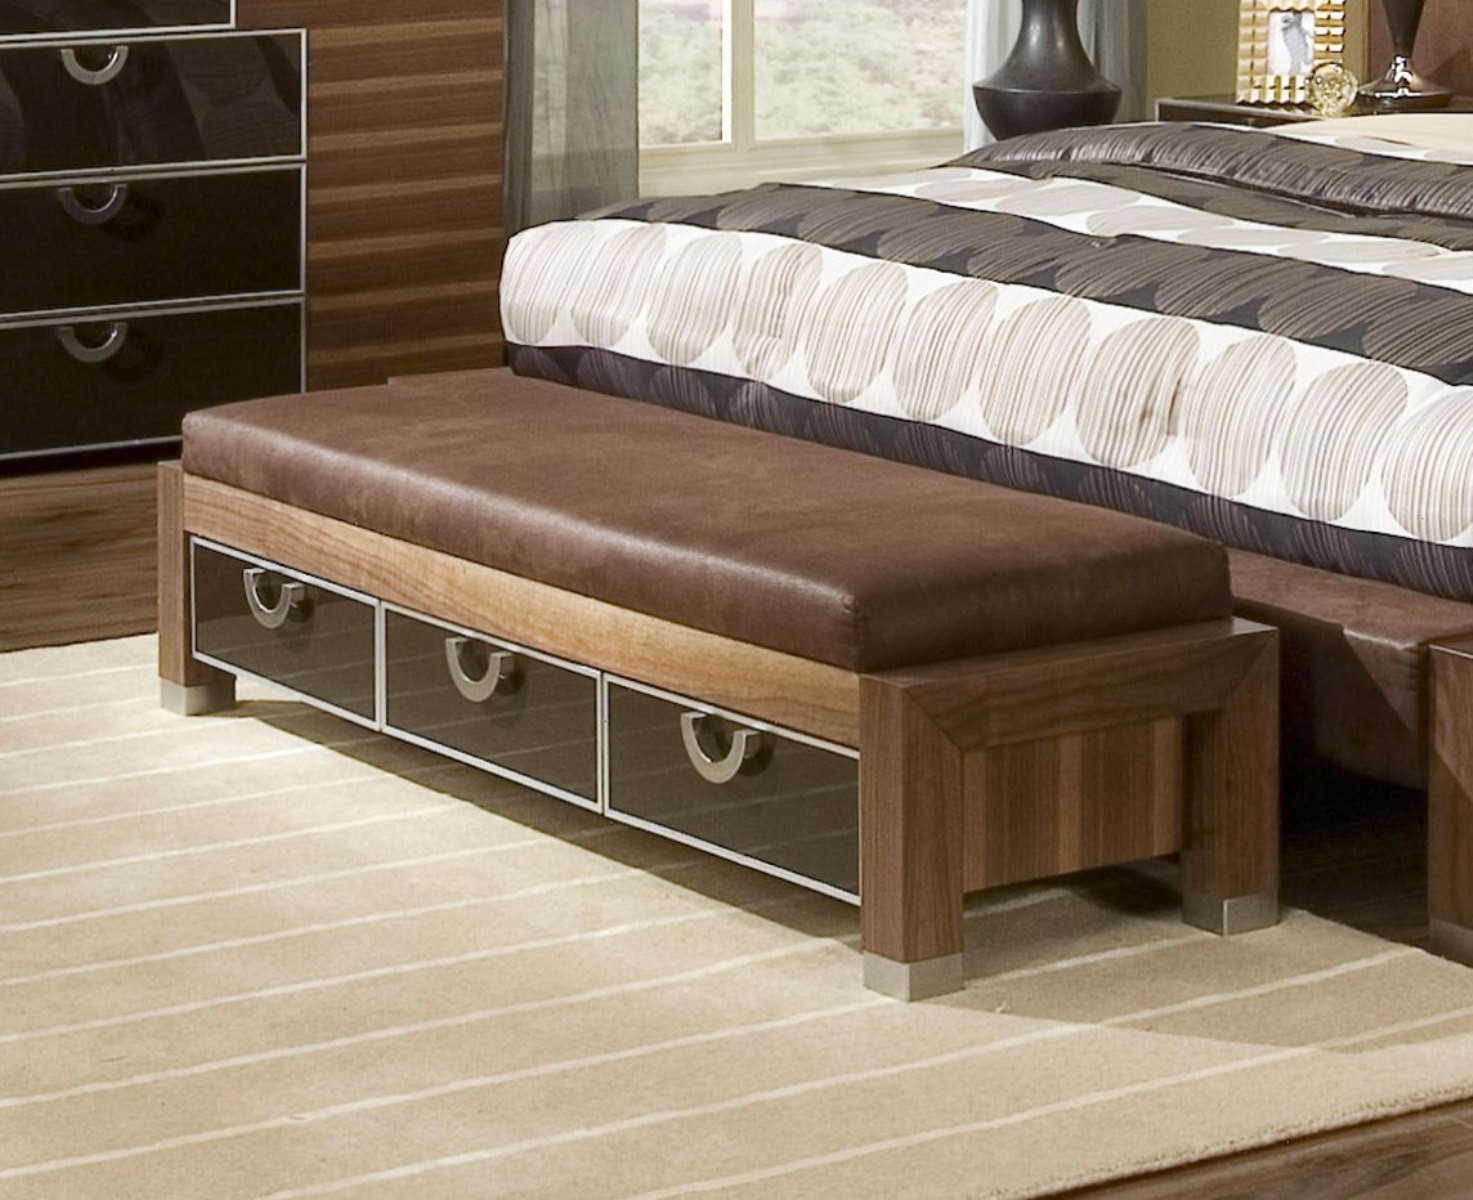 Bedroom Storage Chest Bench
 Bedroom Stunning Bed Benches For Bedroom Furniture Idea